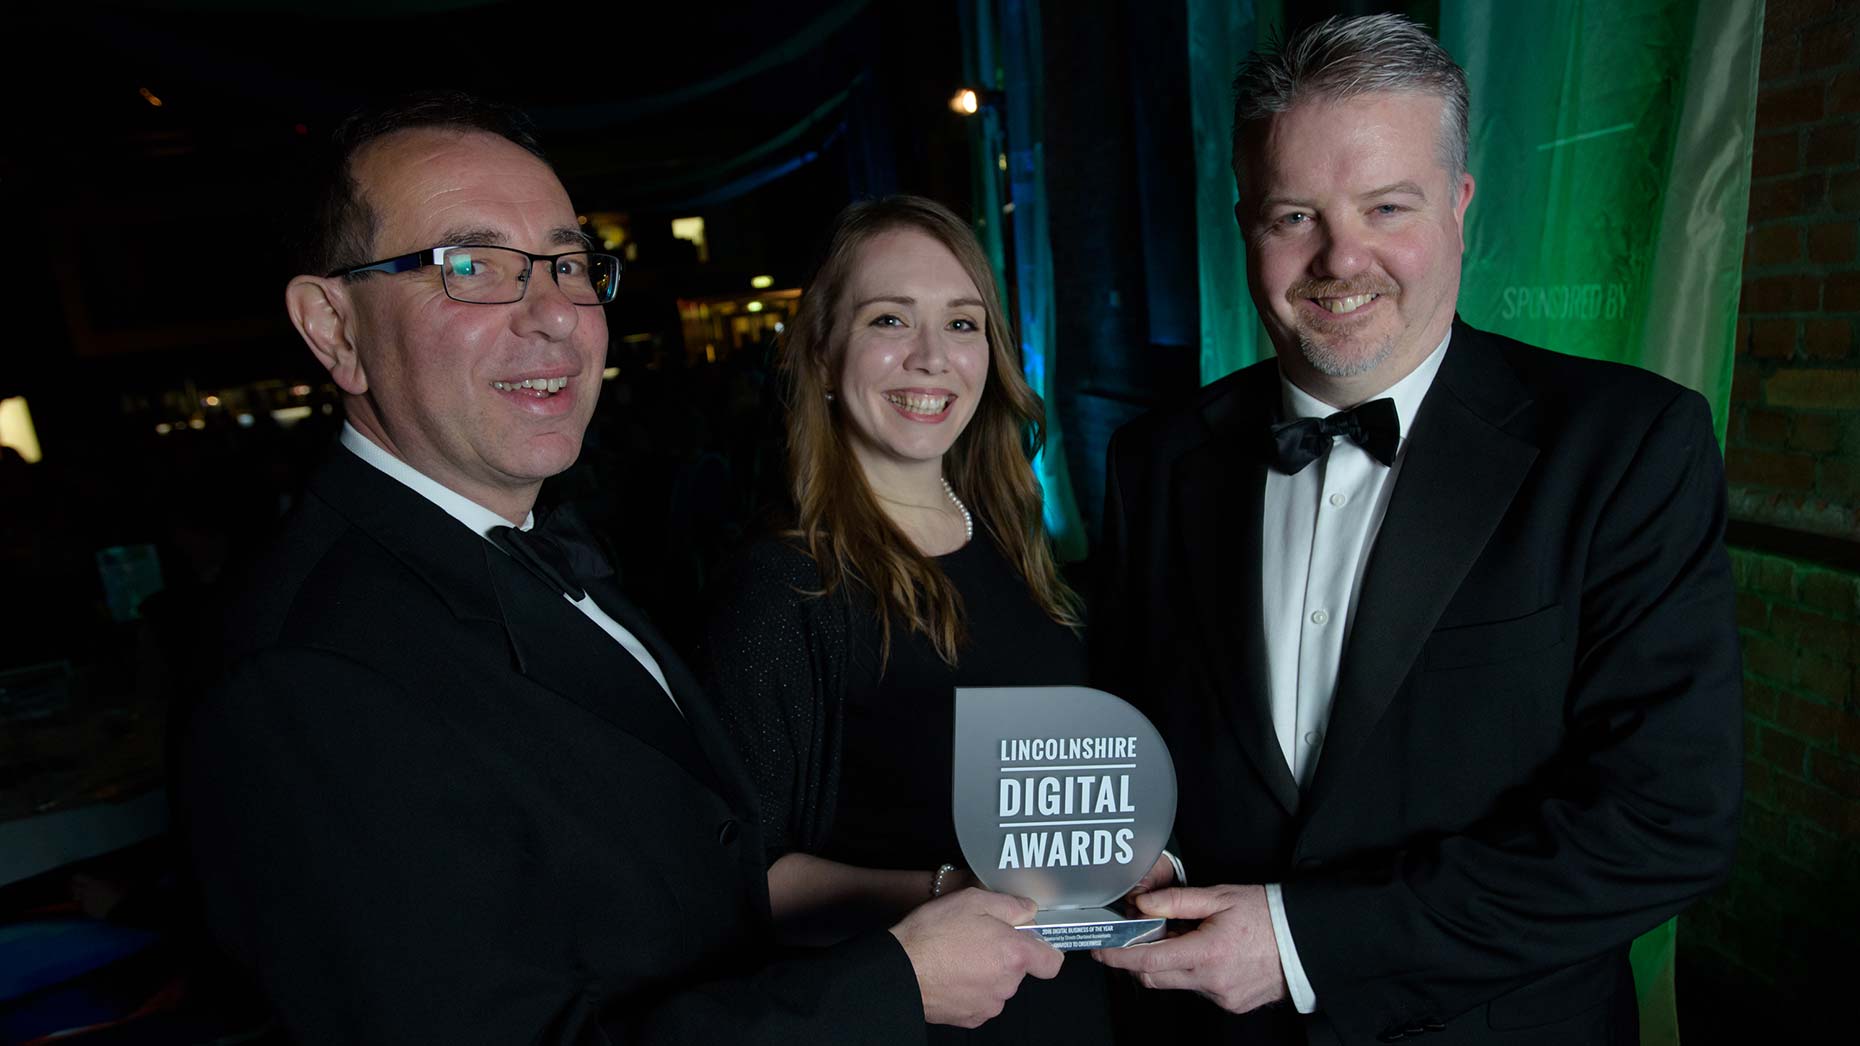 James Pinchbeck, Marketing Partner at Streets Chartered Accountants presented the Digital Business of the Year Award to OrderWise 